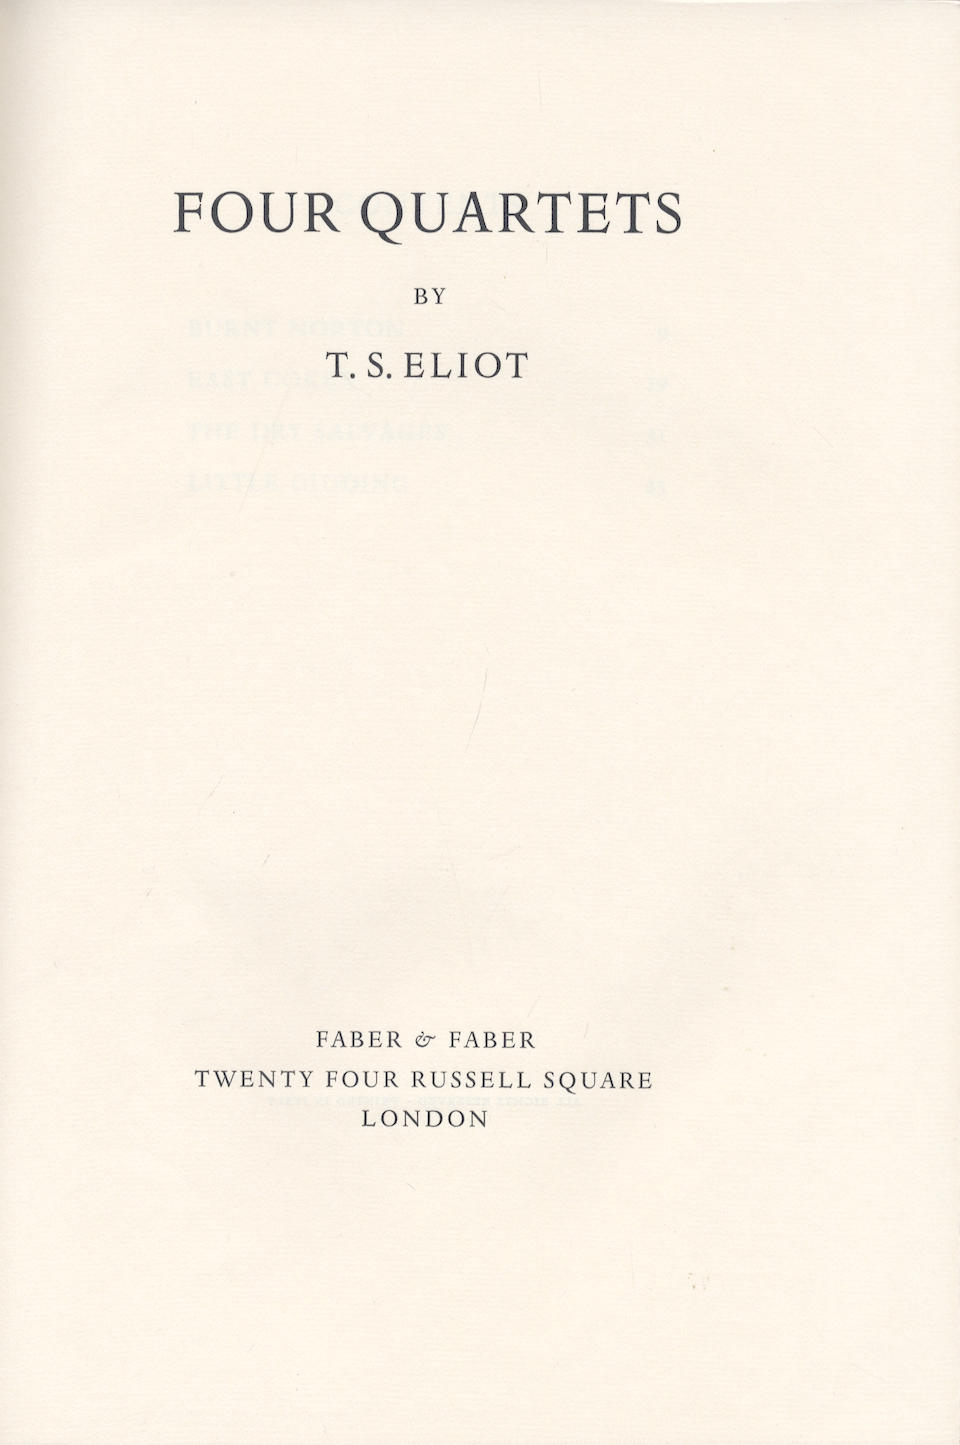 ELIOT (T.S.) Four Quartets, NUMBER 77 OF 290 COPIES SIGNED BY THE AUTHOR, [Verona, Officina Bodoni for Faber & Faber, 1960]